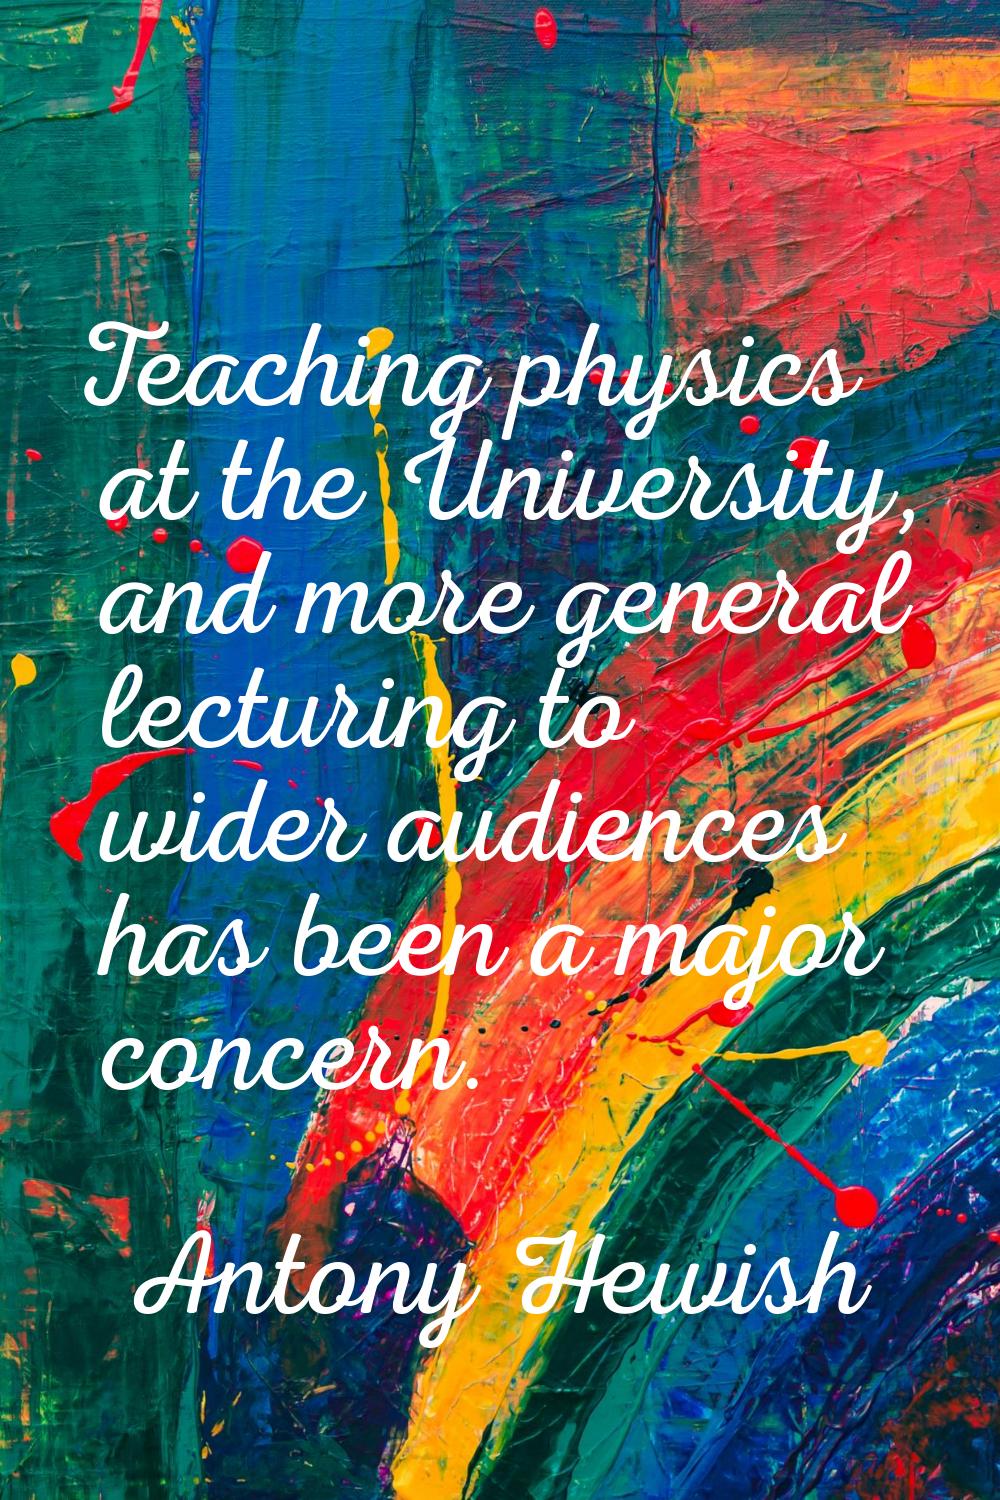 Teaching physics at the University, and more general lecturing to wider audiences has been a major 